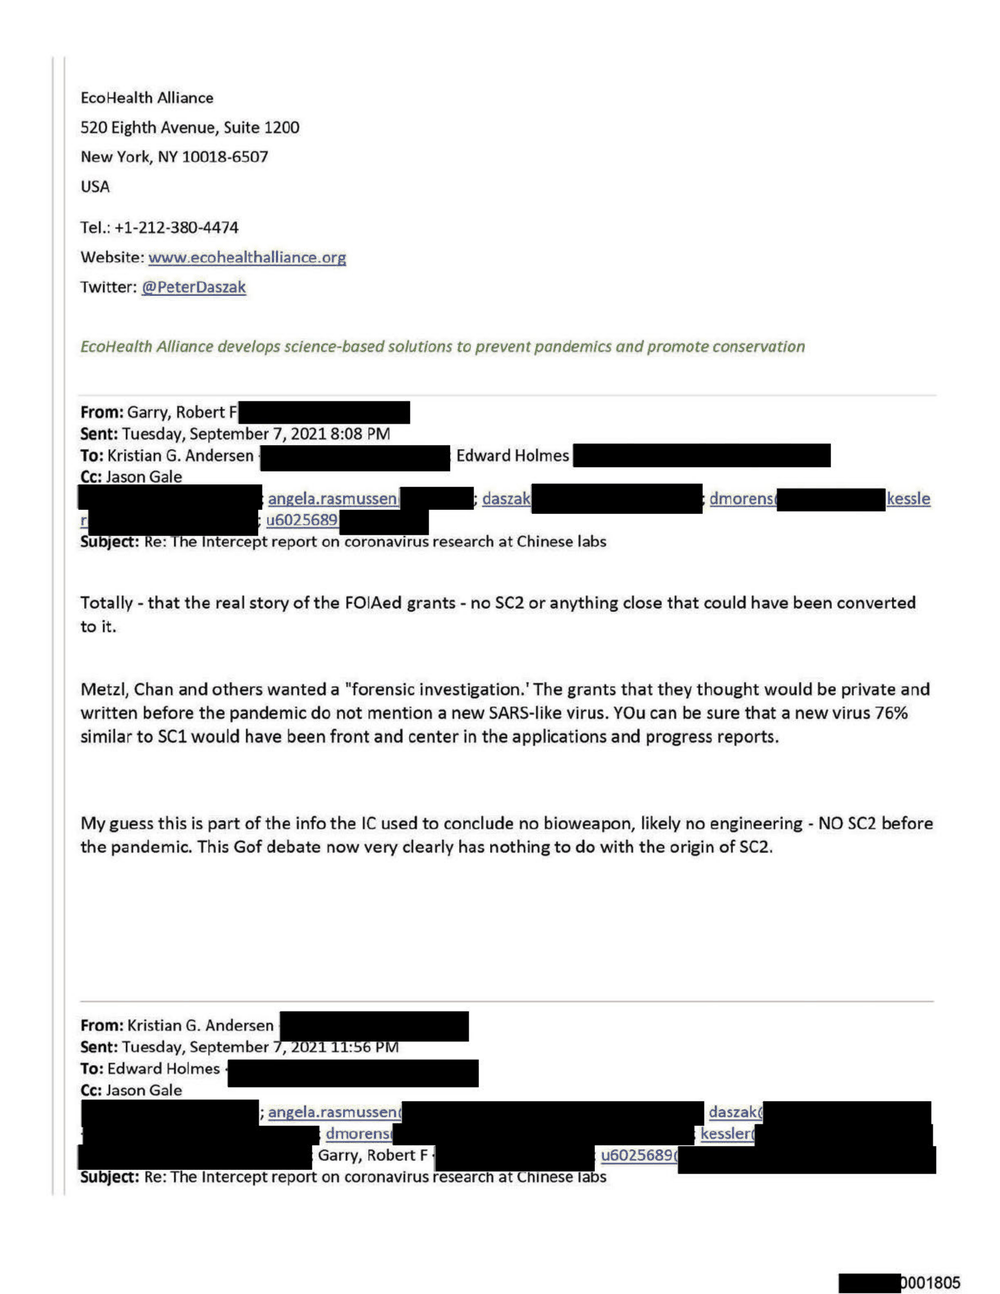 Page 32 from David Morens NIH Emails Redacted